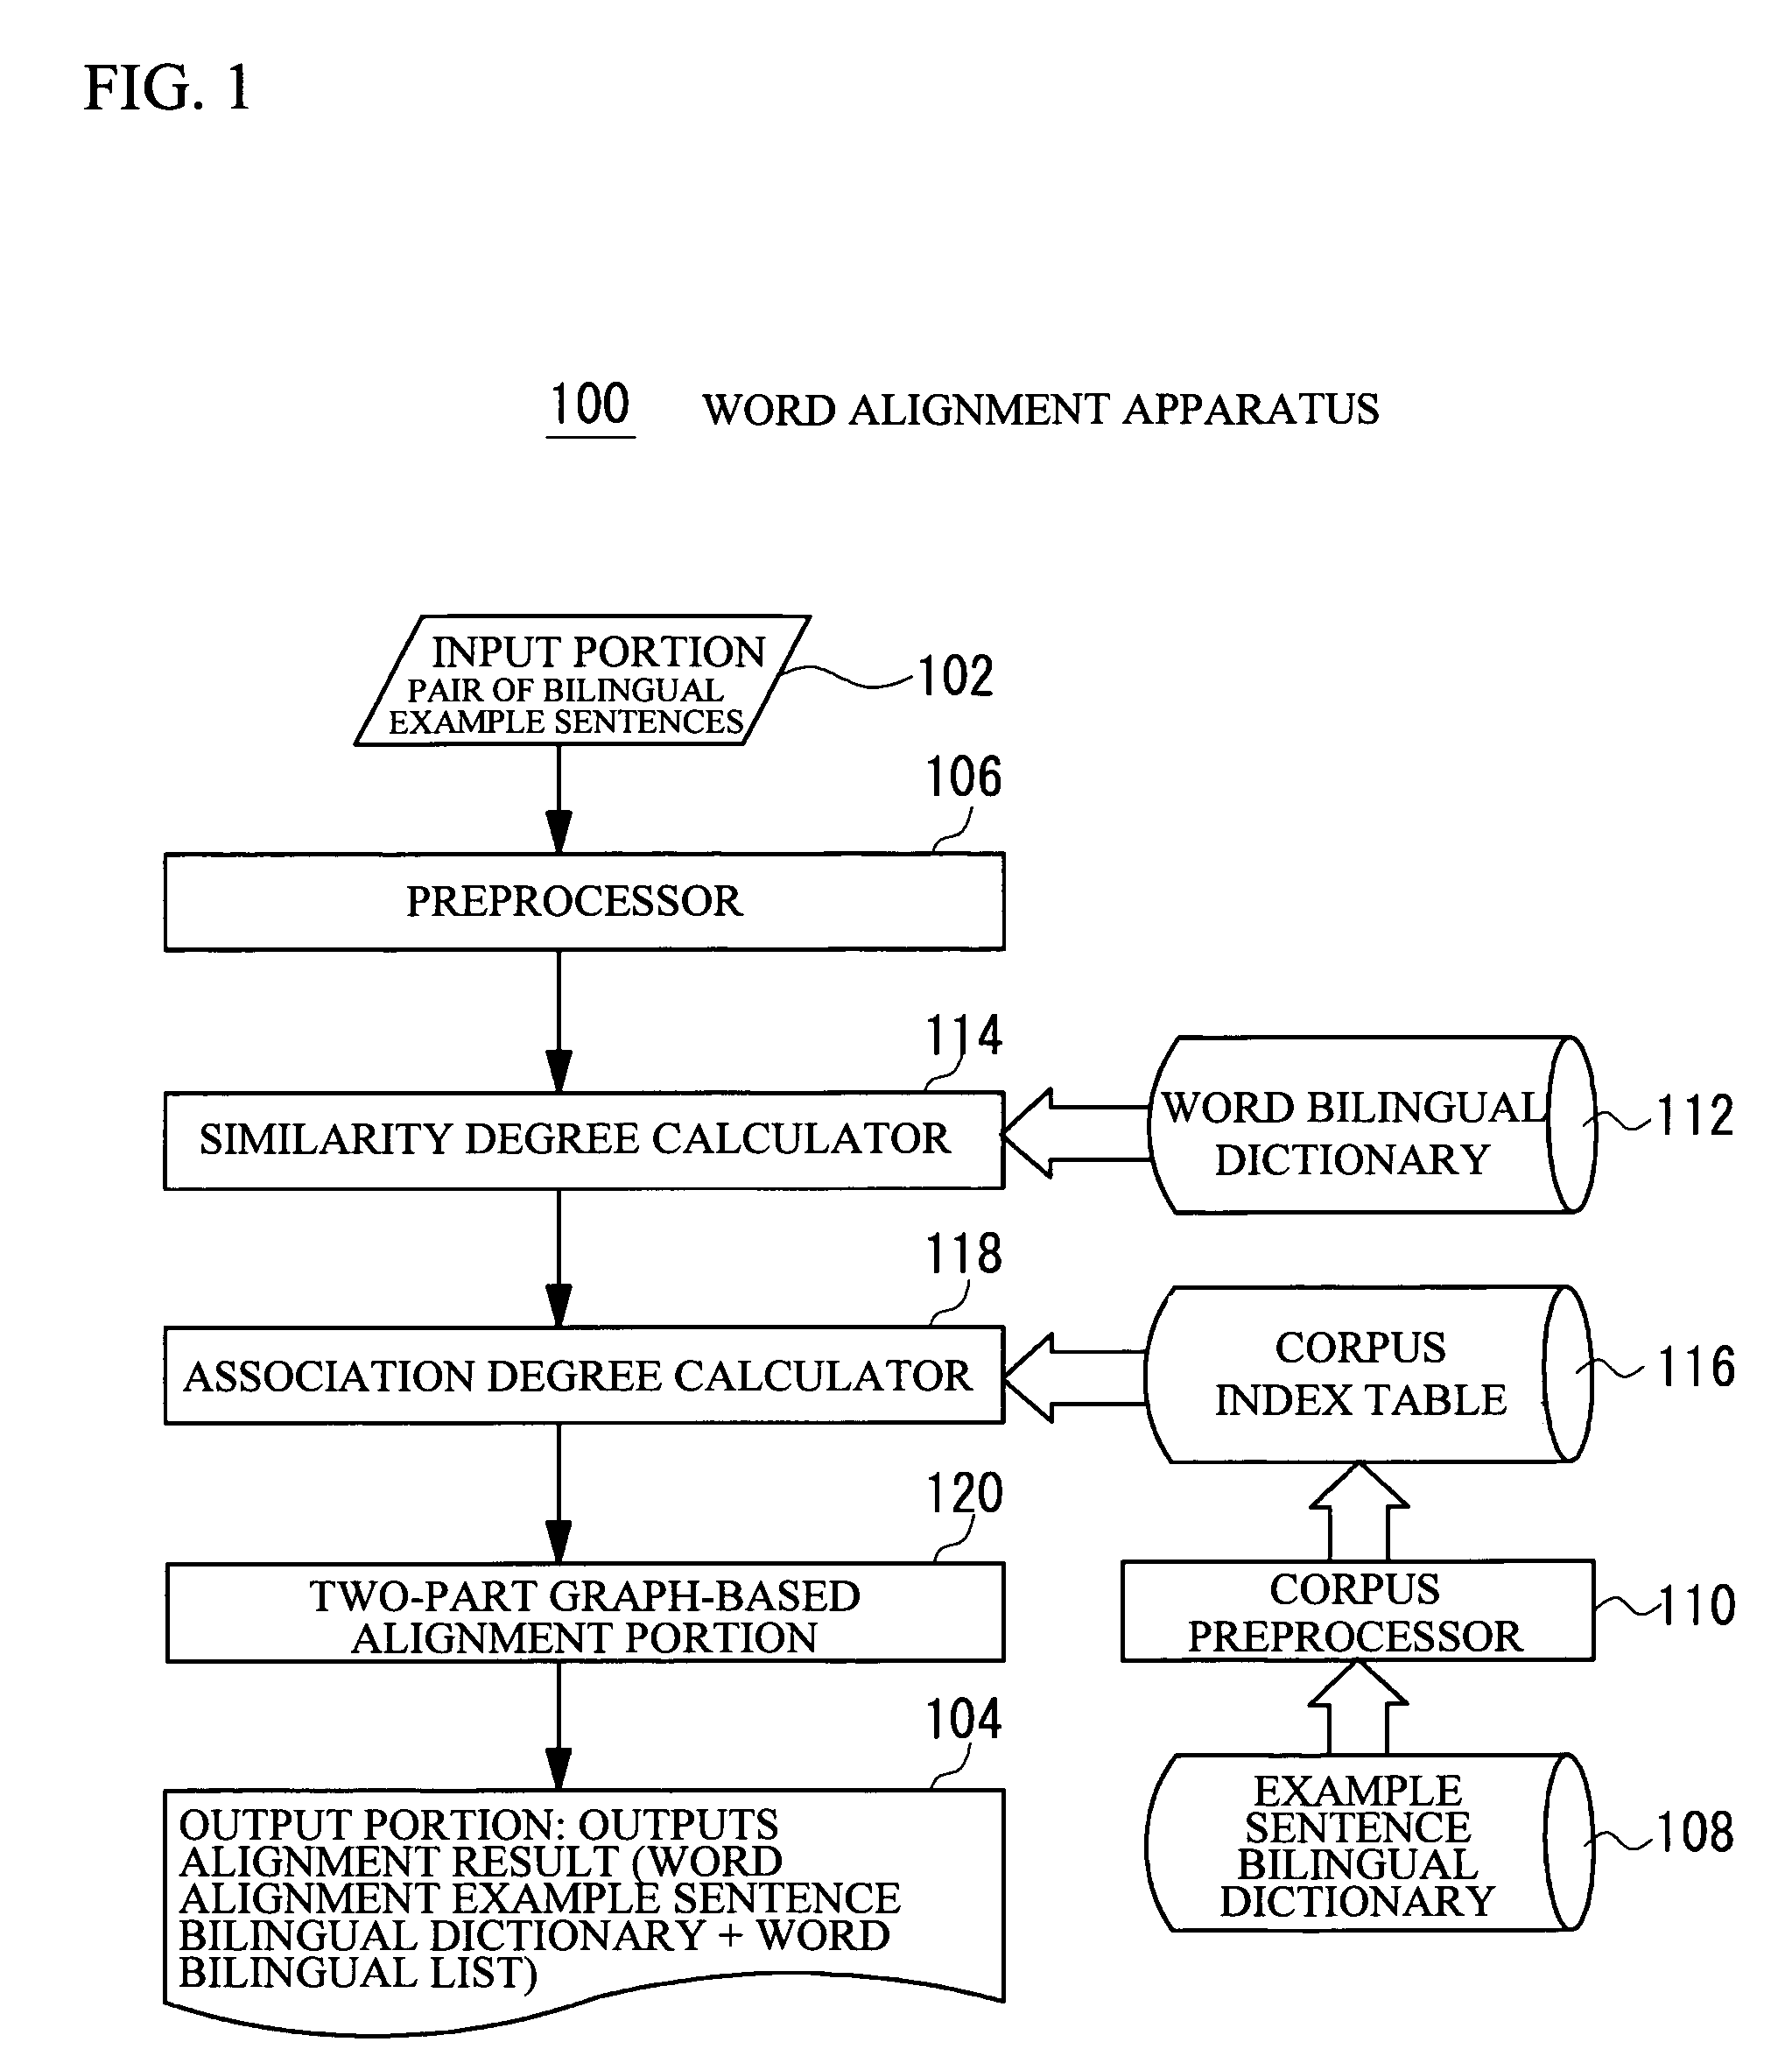 Word alignment apparatus, method, and program product, and example sentence bilingual dictionary